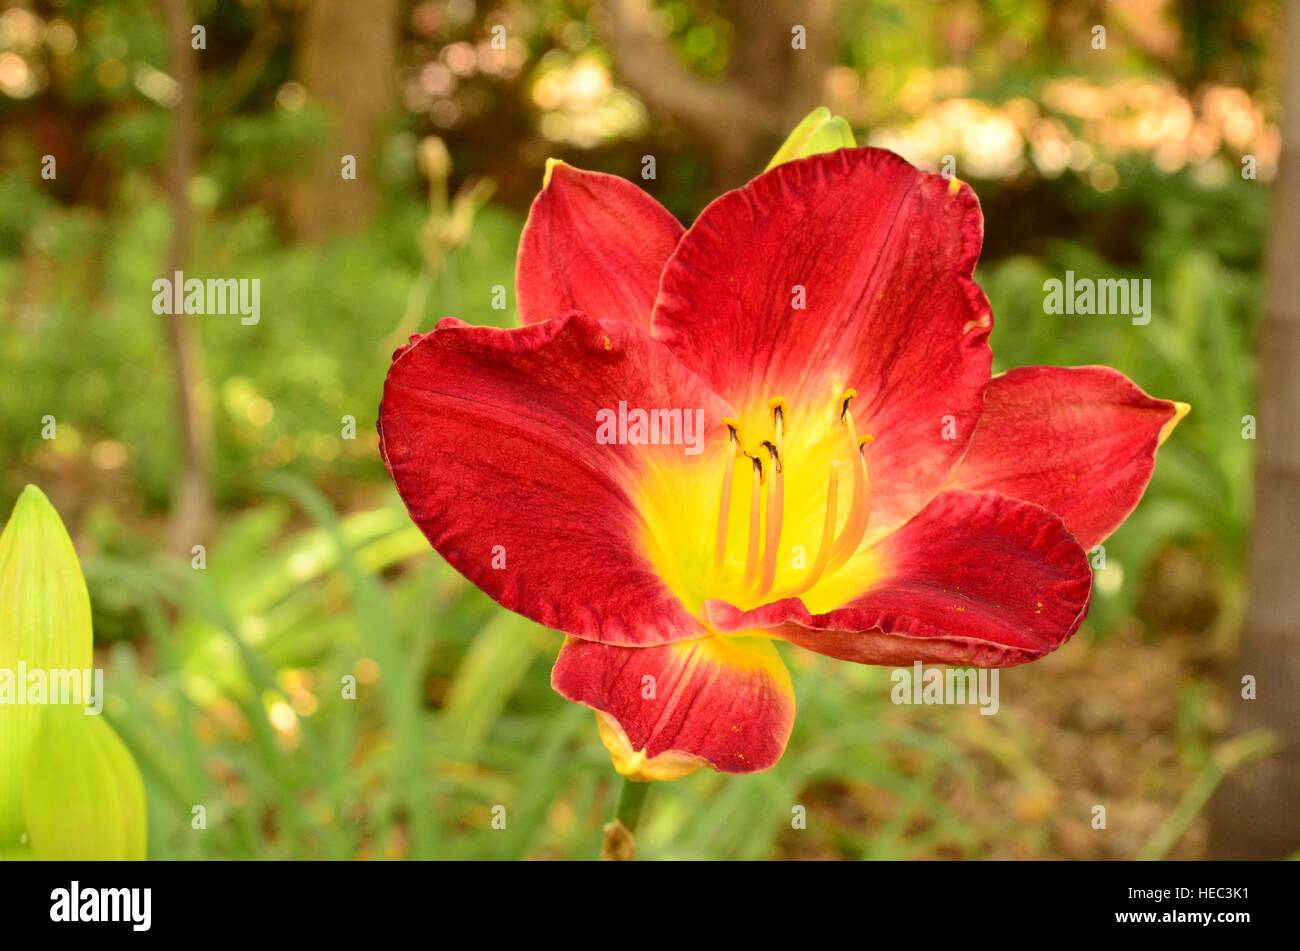 Day lily with purple and bright yellow petals. HEMEROCALLIS. Flowers last for one day only. Flowers best when growing in full sun. Close-up. Stock Photo